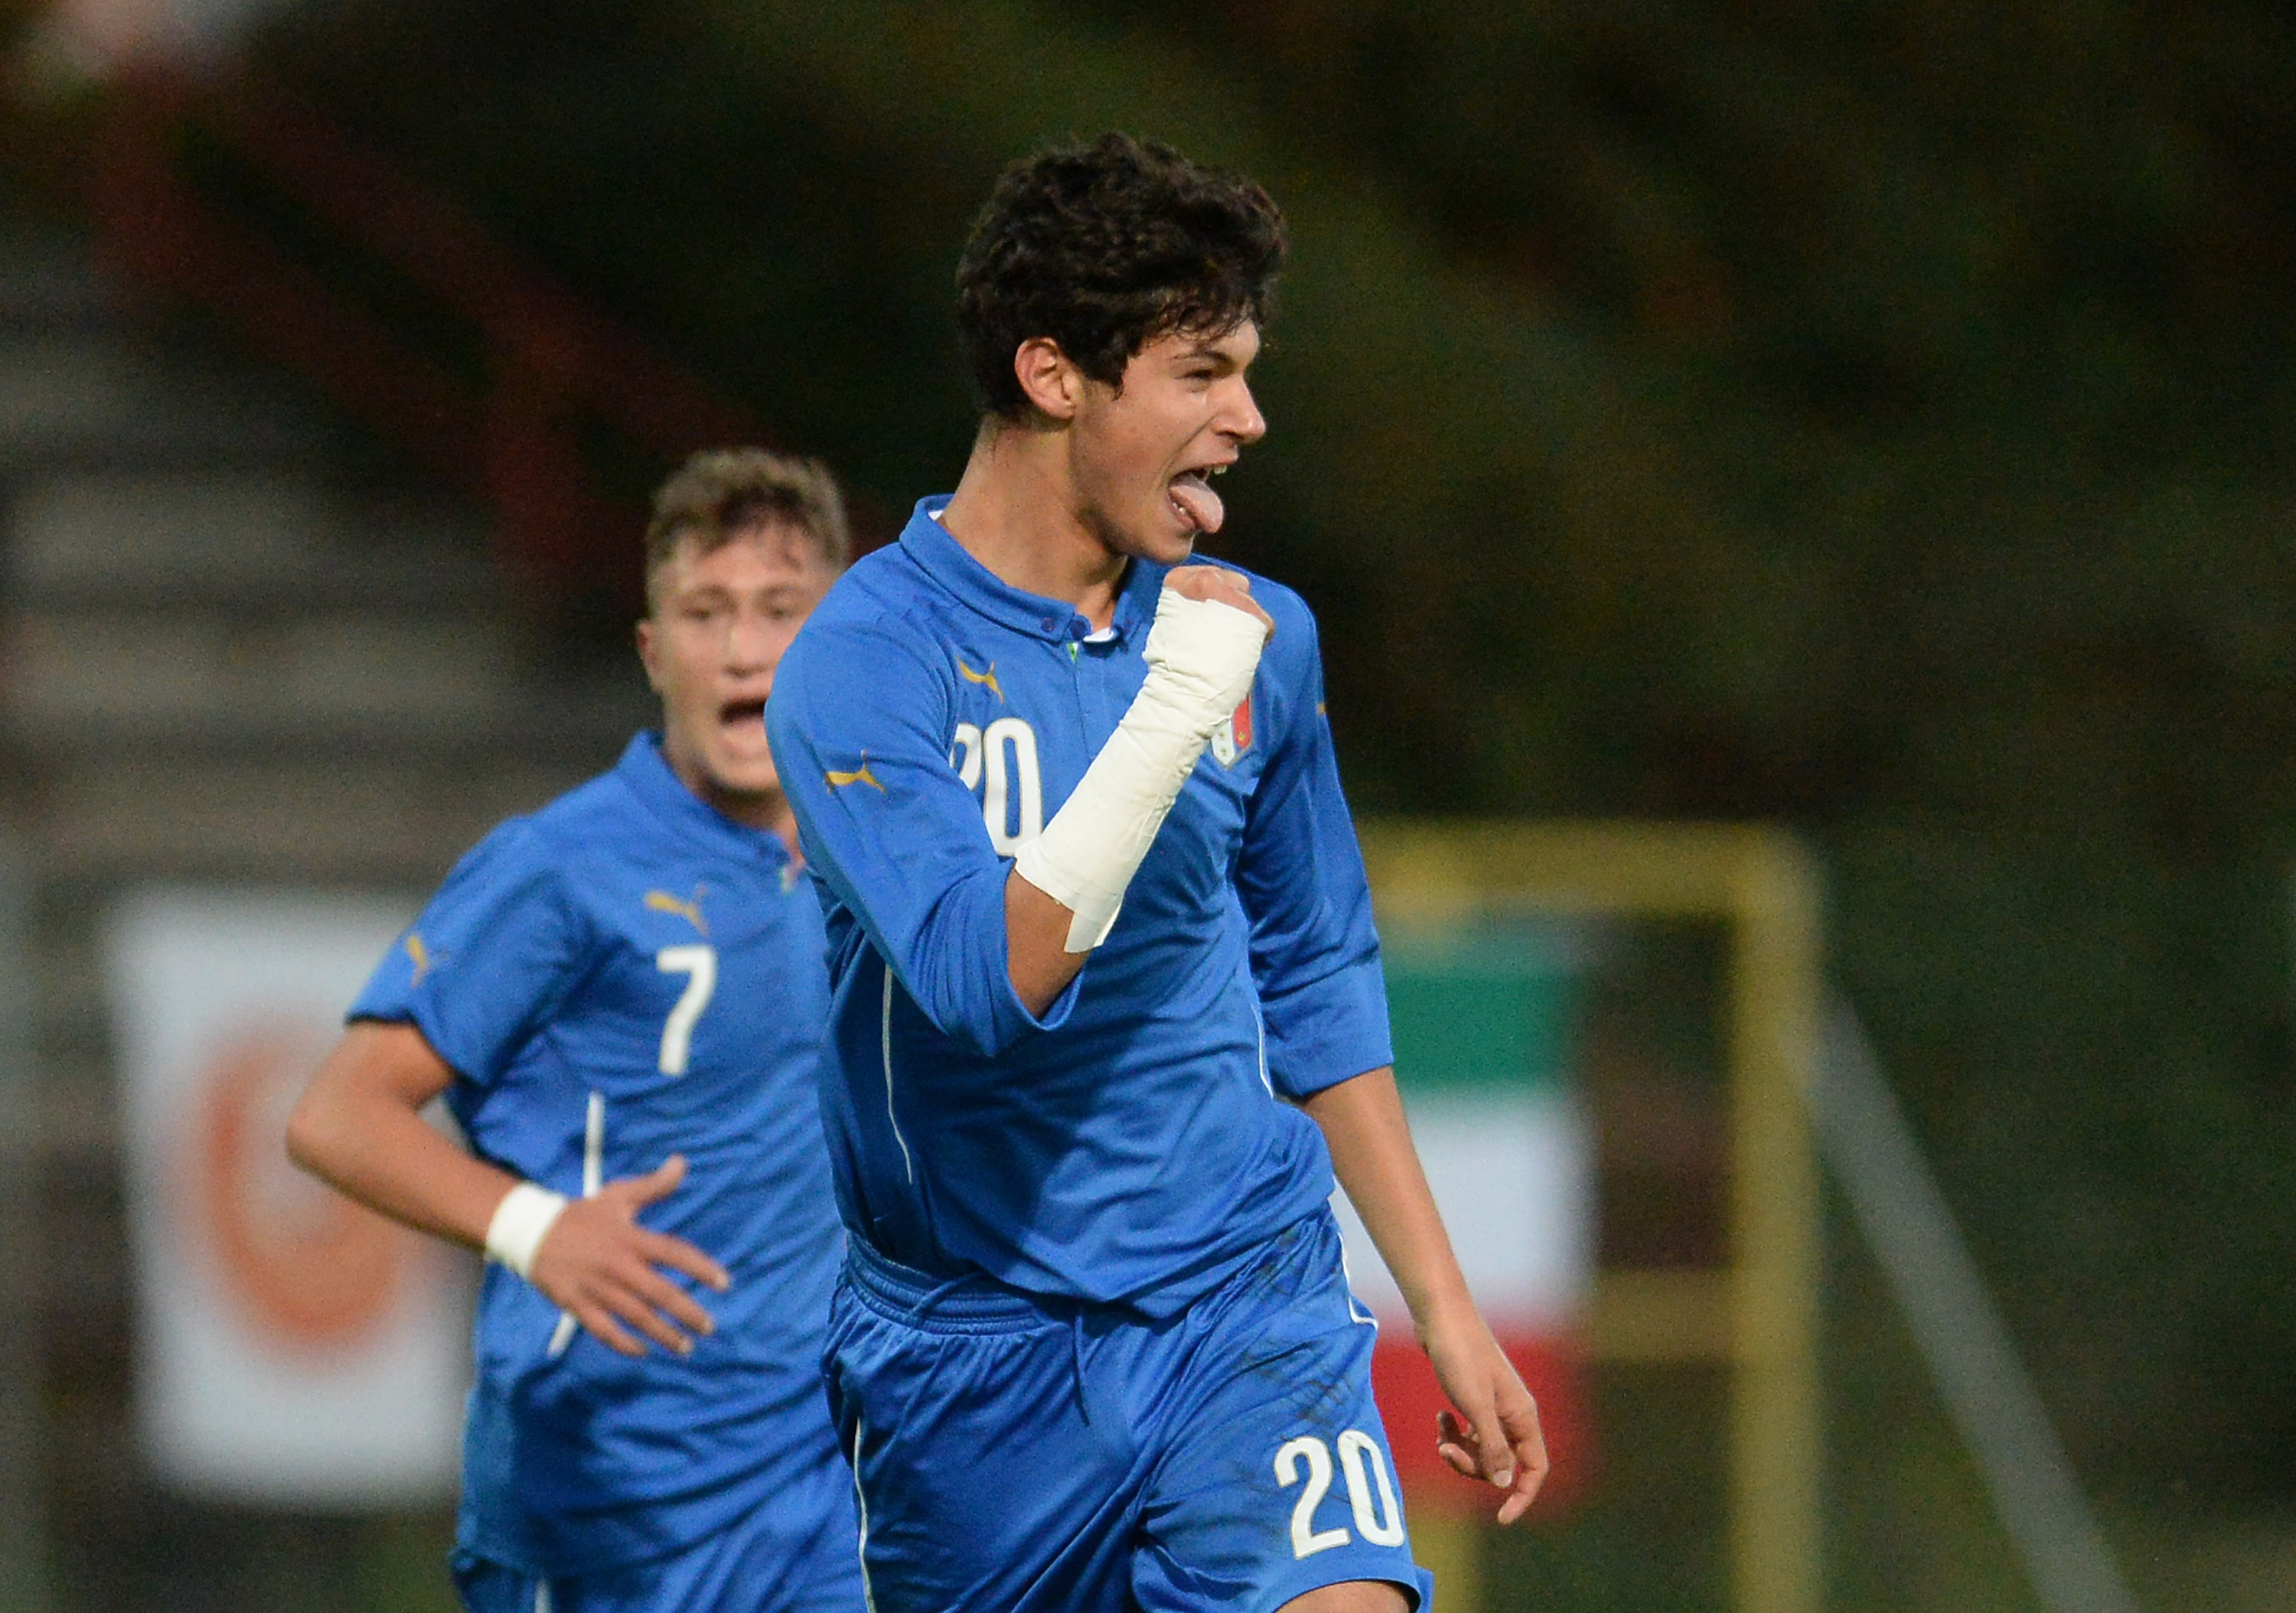 ODERZO, ITALY - OCTOBER 20:  Pietro Pellegri of Italy U16 celebrates after scoring his opening goal during the international friendly match between Italy U16 and Turkey U16 at Stadio Opitergium on October 20, 2015 in Oderzo, Italy.  (Photo by Dino Panato/Getty Images)